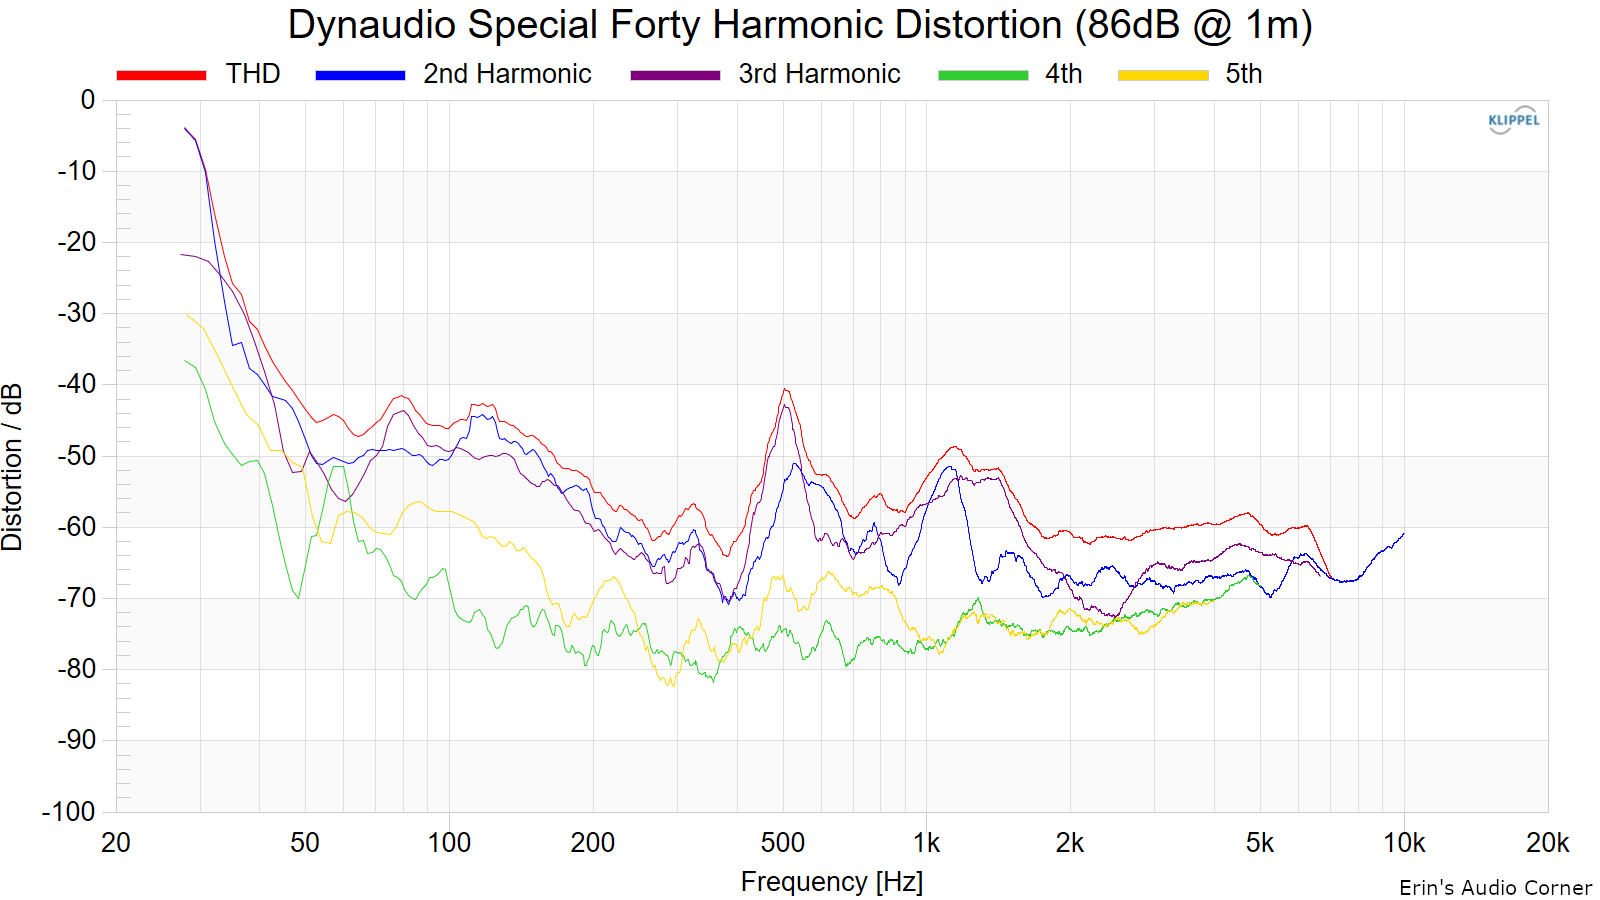 Dynaudio-Special-Forty-Harmonic-Distortion-86dB-1m.png